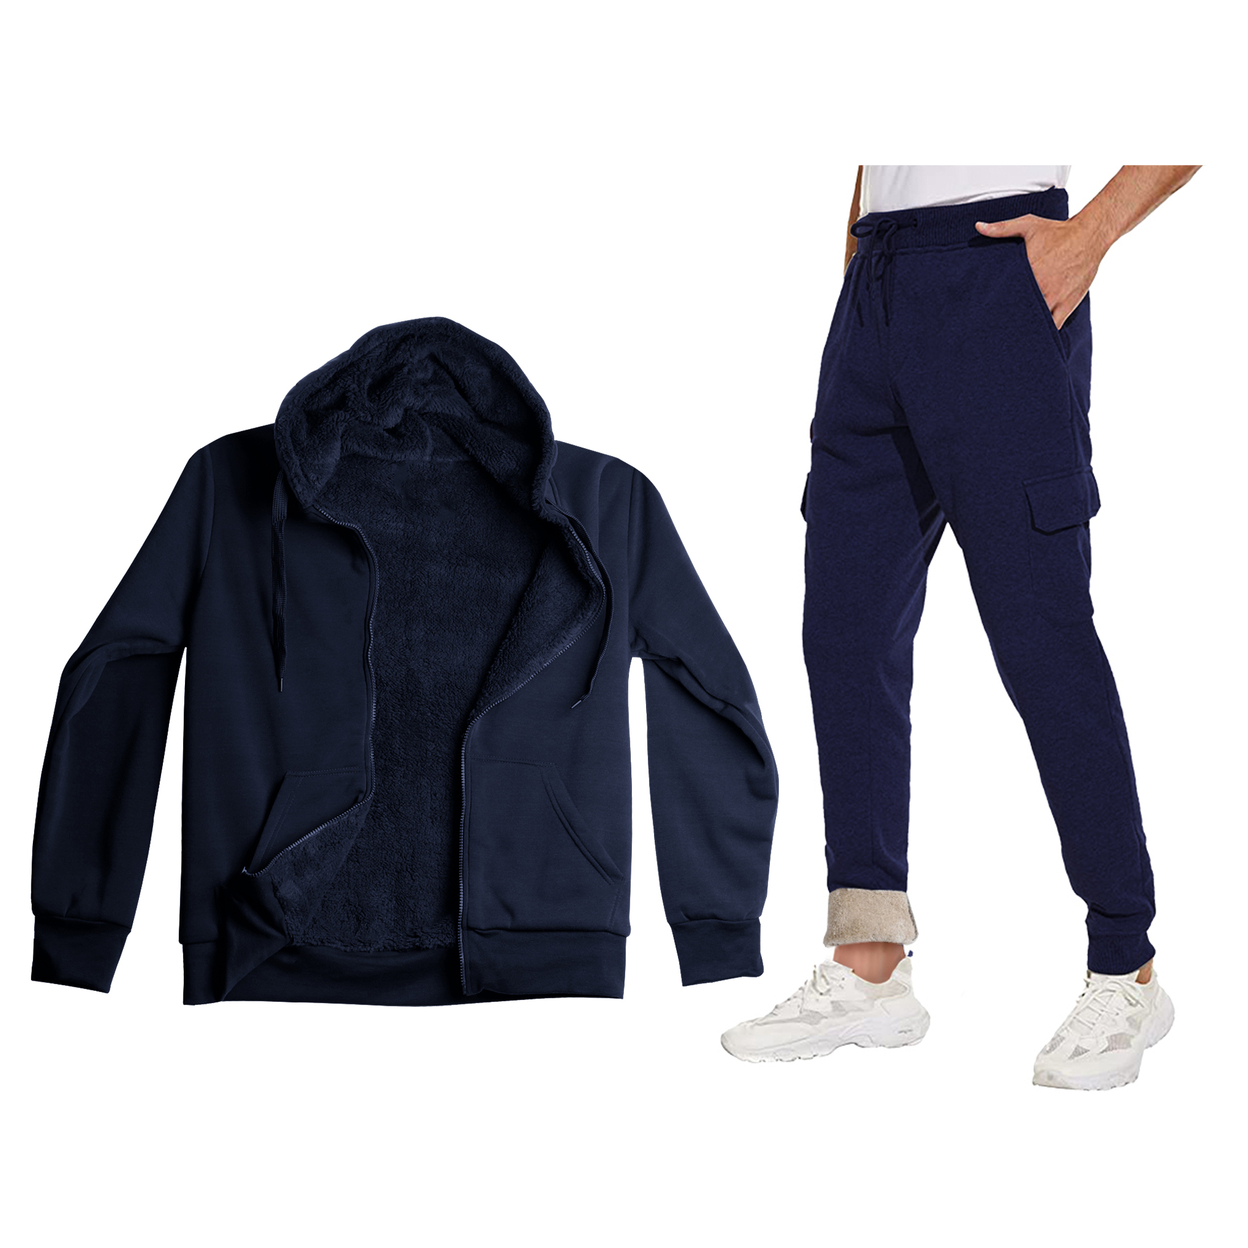 Men's Big & Tall Casual Super Soft Winter Warm Thick Sherpa Lined Sweatsuit Jogger Set - Navy, 3xl